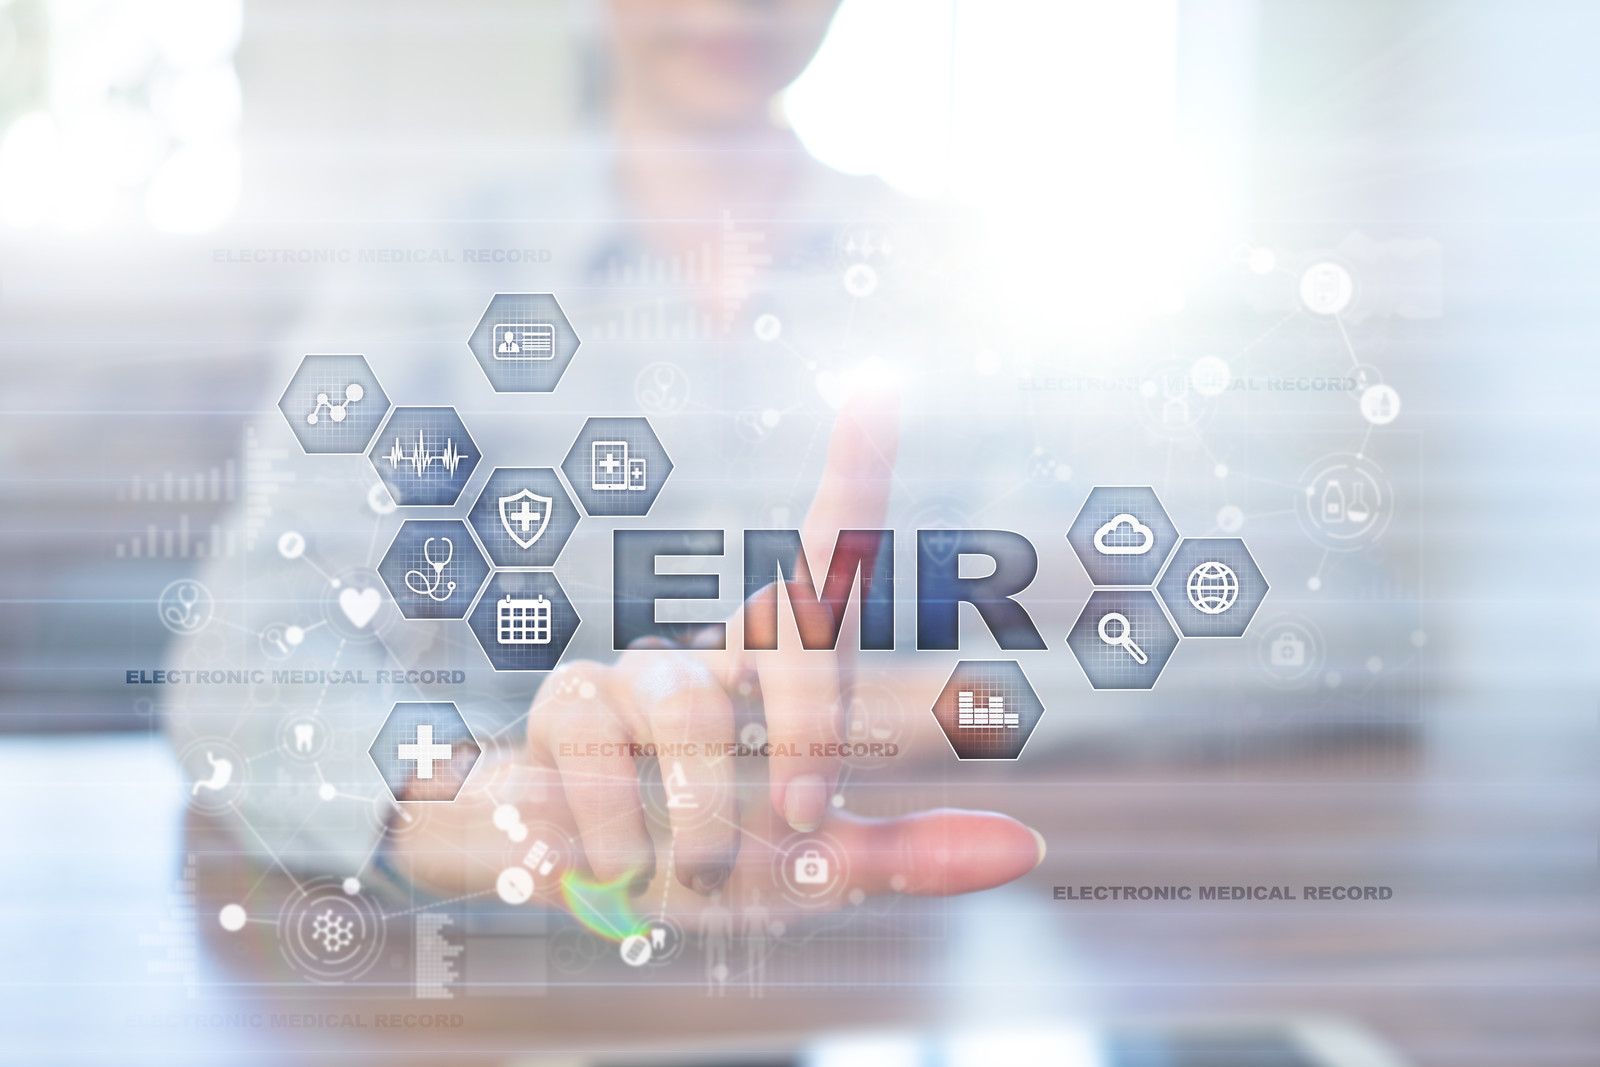 Why Use Transcription Along with EMR System